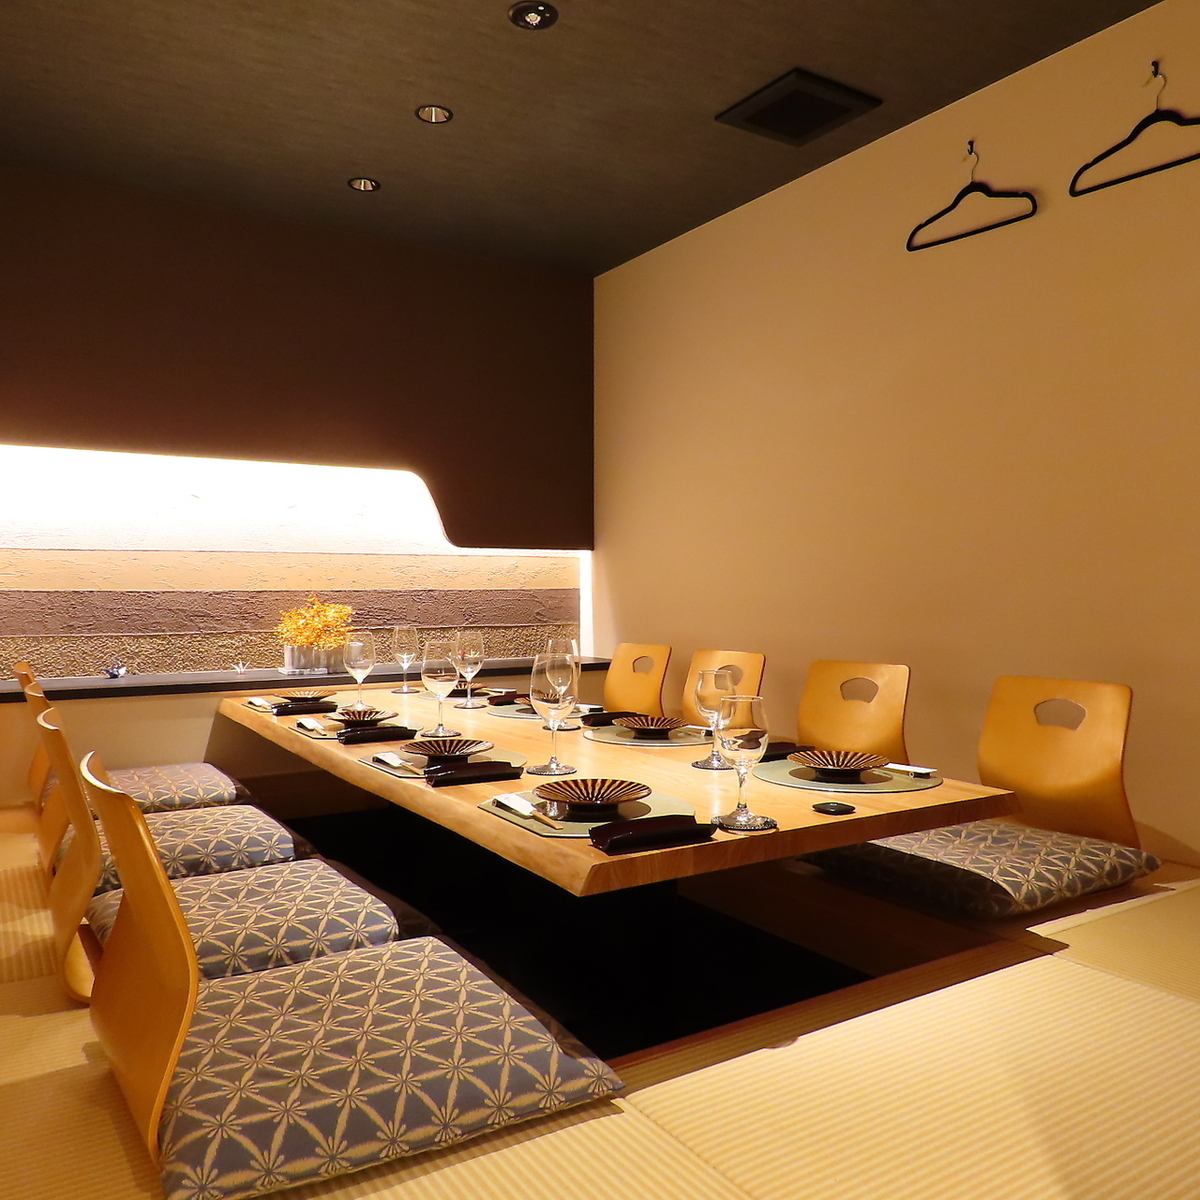 The relaxing private rooms, filled with the warmth of Japanese culture, can also accommodate large groups.